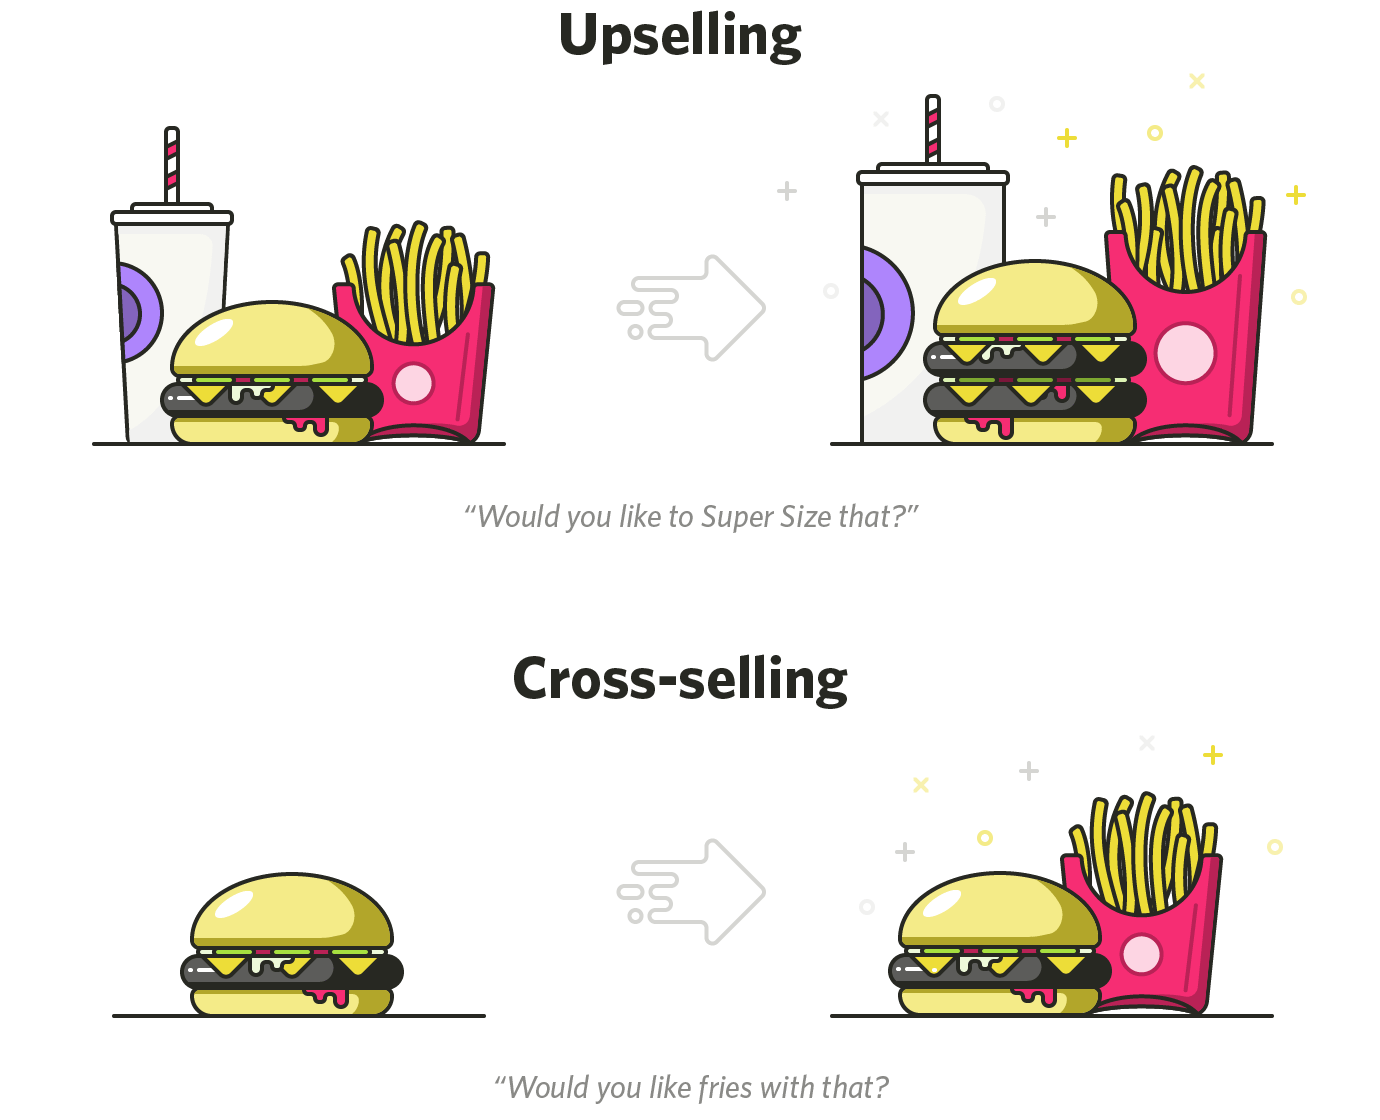  Up Selling  Cross Selling  to increase your revenue 